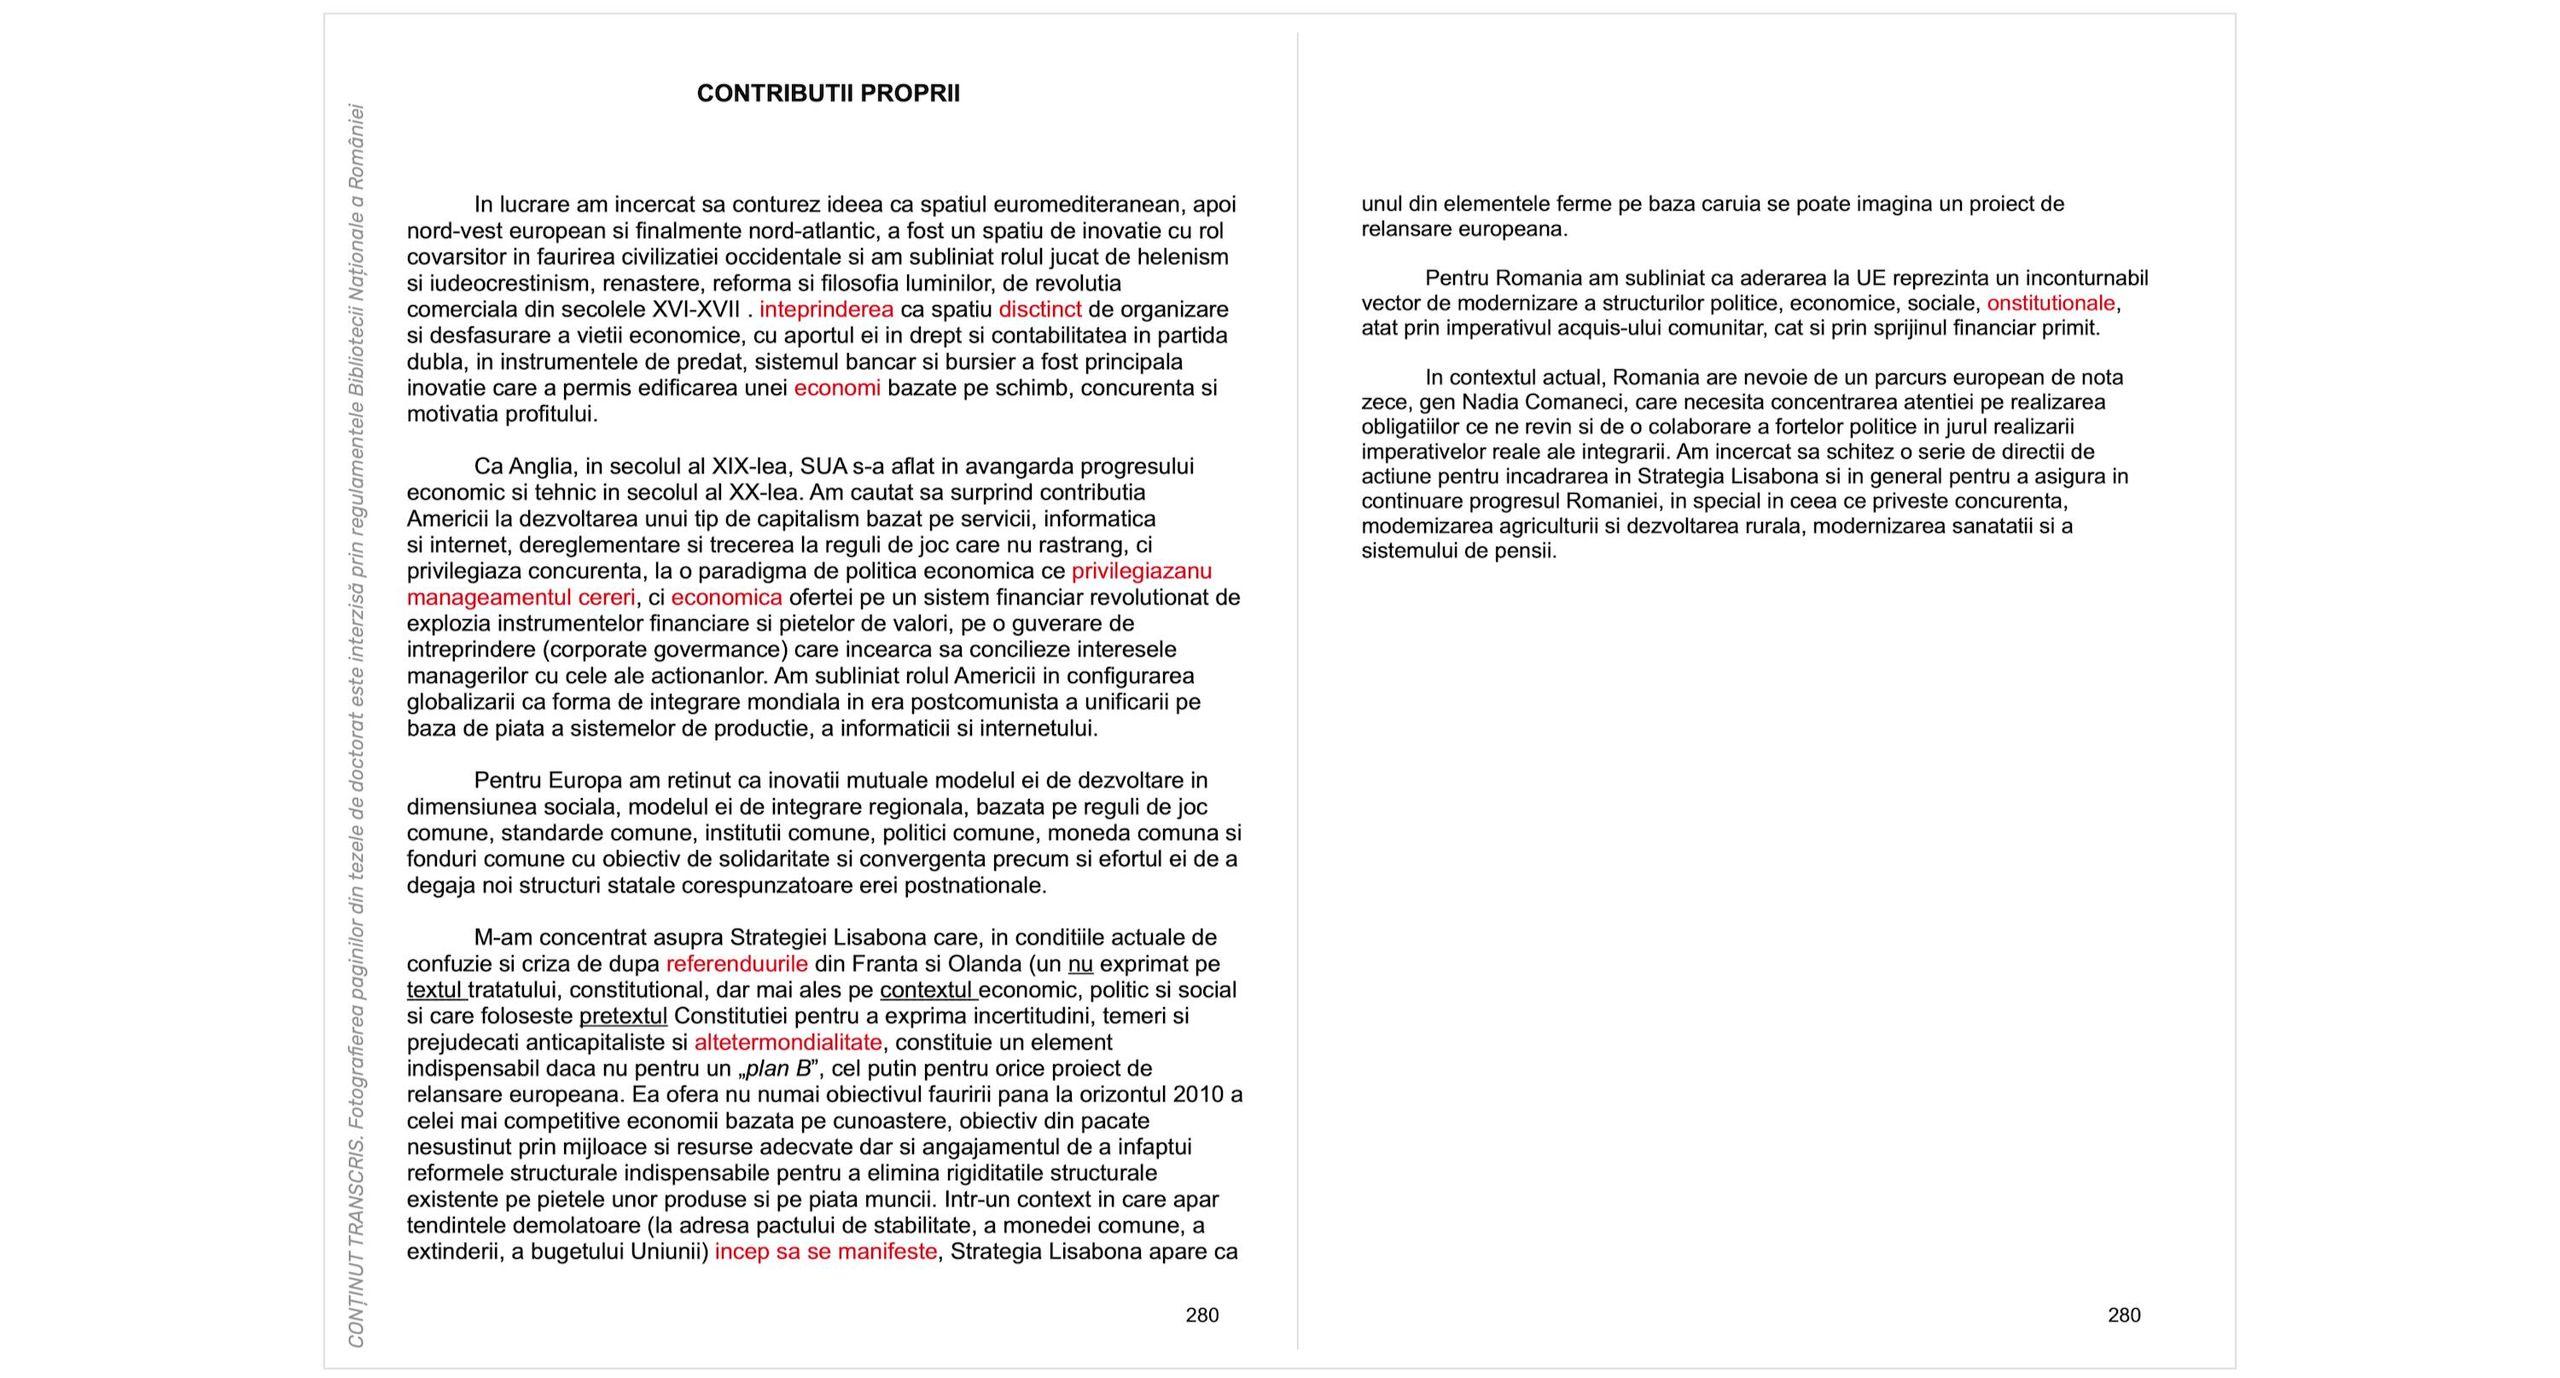 The two pages titled "OWN CONTRIBUTIONS" from Mircea Geoană's doctoral thesis (pp. 280-281). The regulations of the National Library of Romania do not allow photographing pages from doctoral theses, and the content in the image is transcribed exactly as in the original (lack of diacritics and spelling errors, marked in red by <strong>PressOne</strong>, belong to the author).